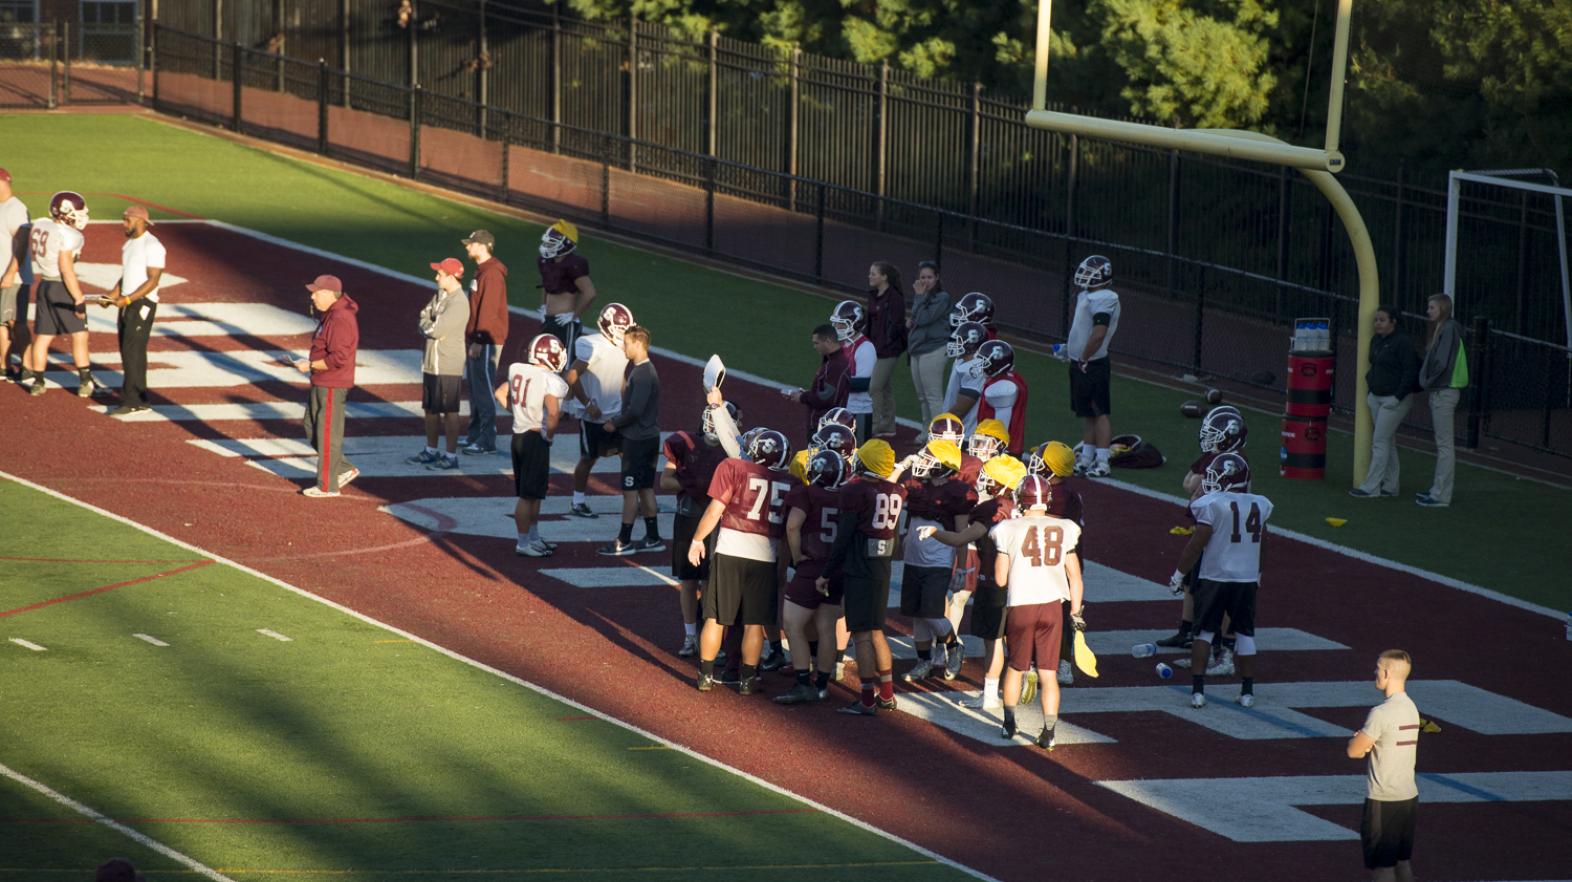 Men's football team practices on Stagg Field